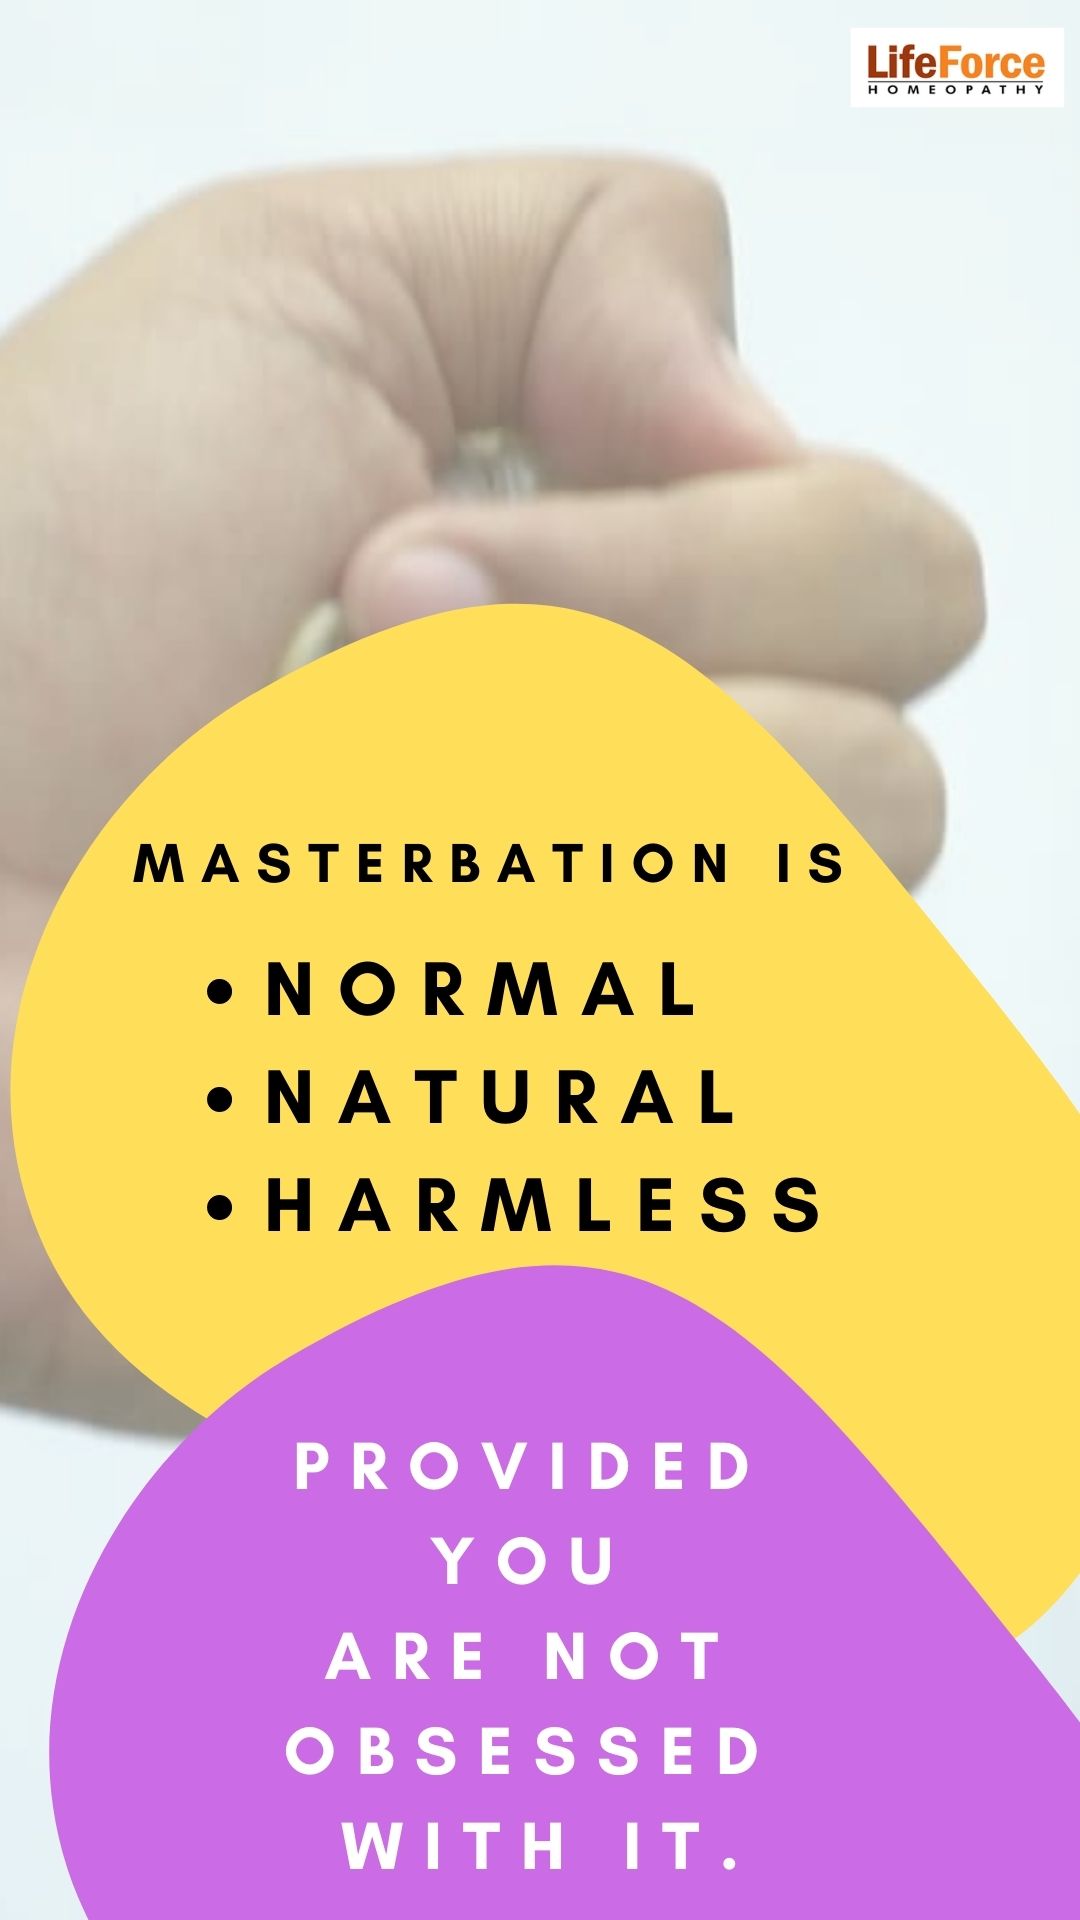 Masturbation Syndrome Myths And Facts To Know About It image